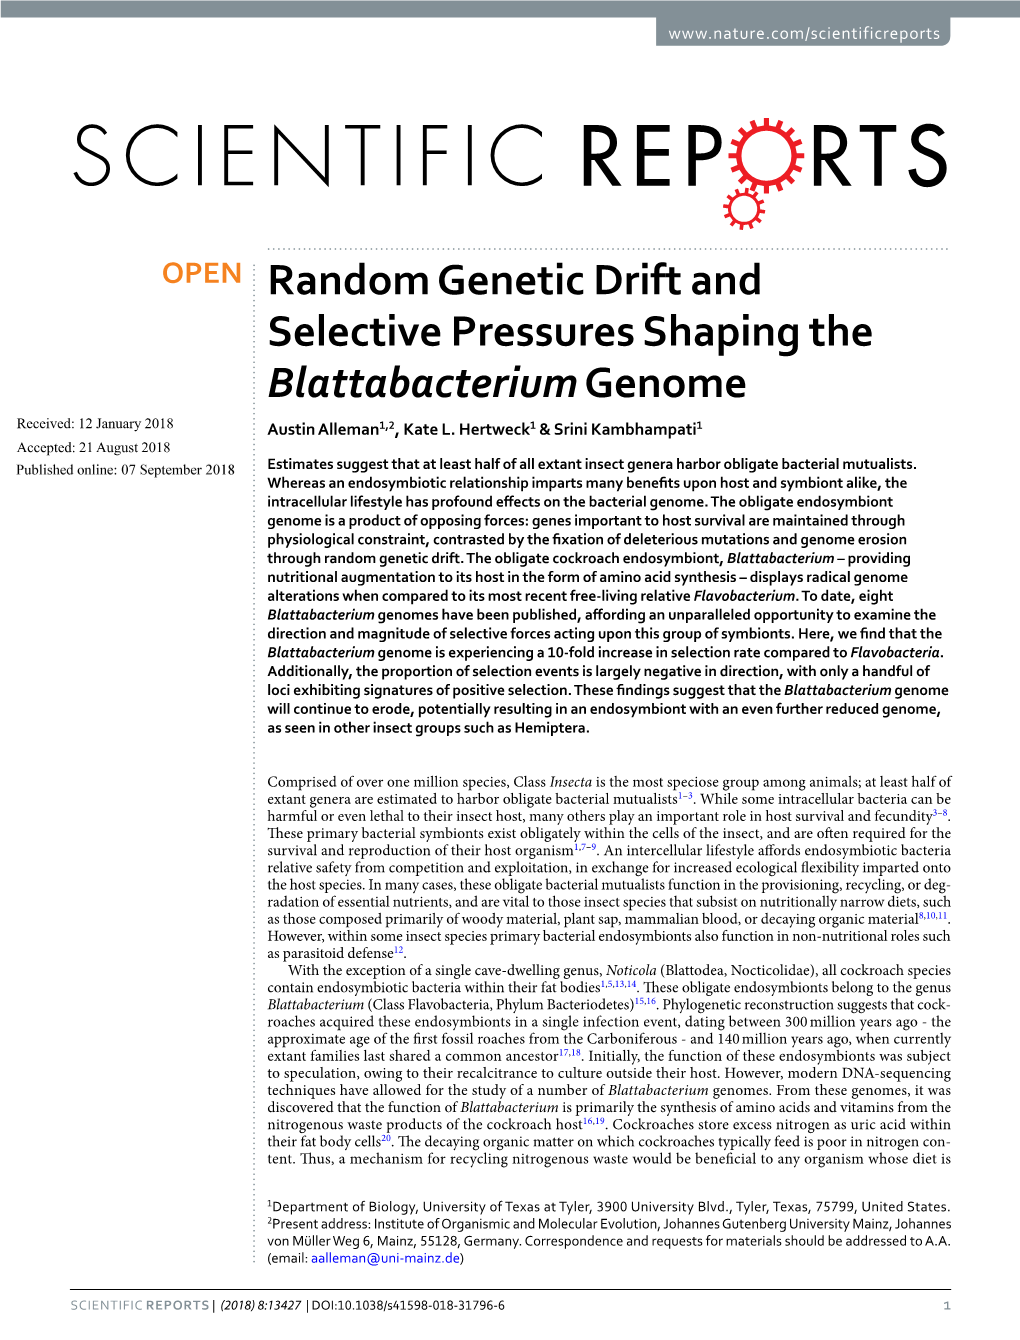 Random Genetic Drift and Selective Pressures Shaping the Blattabacterium Genome Received: 12 January 2018 Austin Alleman1,2, Kate L